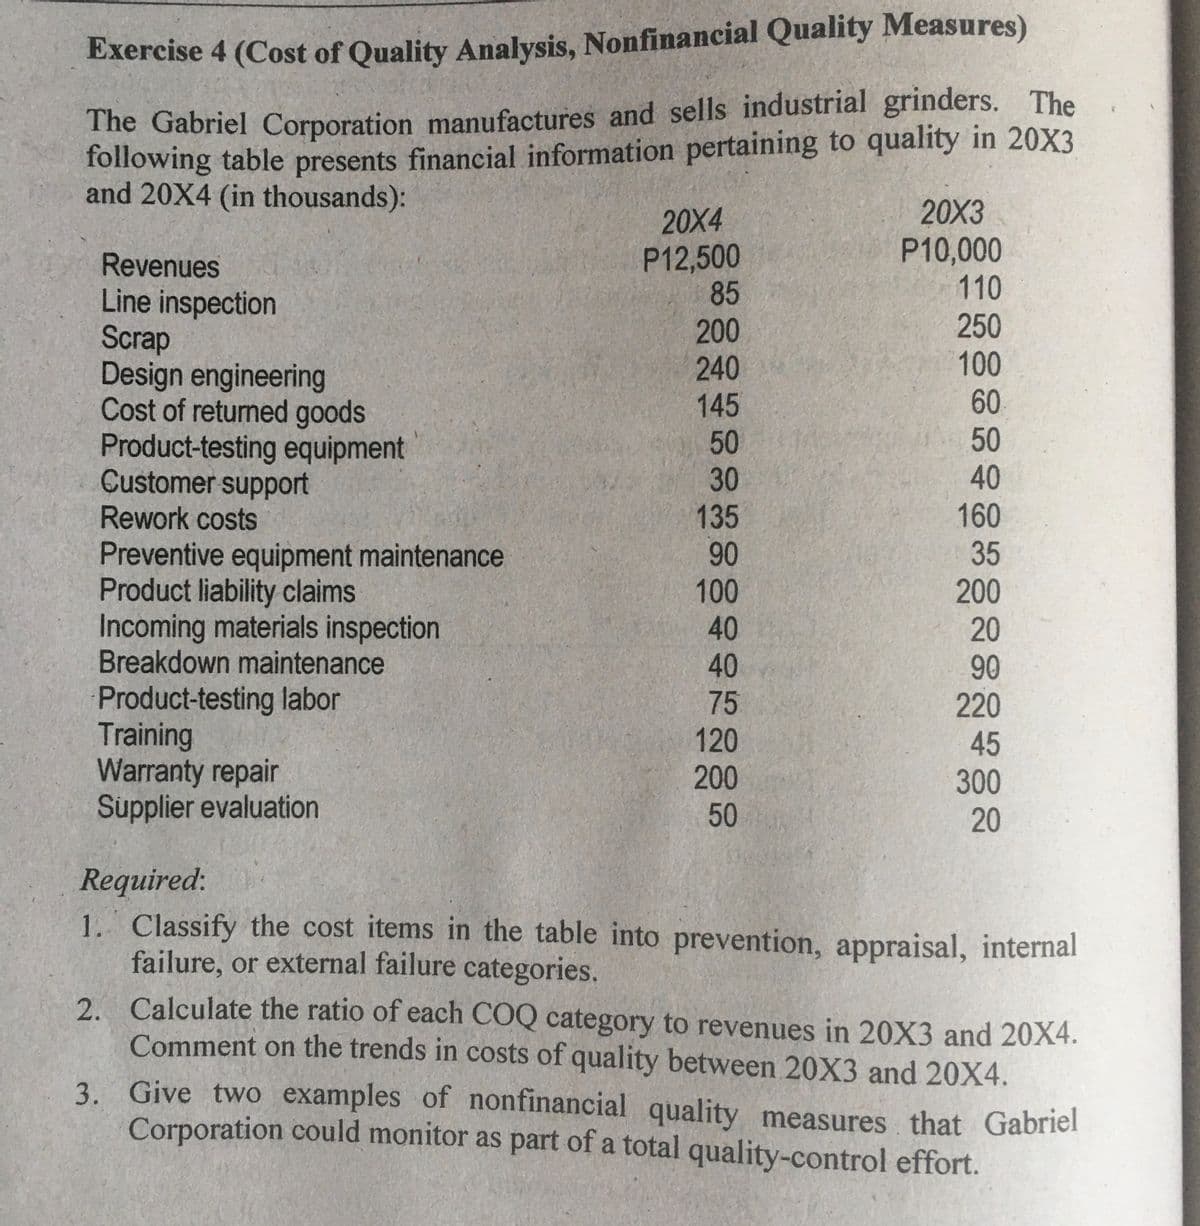 Exercise 4 (Cost of Quality Analysis, Nonfinancial Quality Measures)
The Gabriel Corporation manufactures and sells industrial grinders. The
following table presents financial information pertaining to quality in 20X3
and 20X4 (in thousands):
20X3
P10,000
110
250
100
60
20X4
P12,500
85
Revenues
Line inspection
Scrap
Design engineering
Cost of returned goods
Product-testing equipment
Customer support
200
240
145
50
40
50
30
135
90
100
40
40
Rework costs
160
35
Preventive equipment maintenance
Product liability claims
Incoming materials inspection
Breakdown maintenance
200
20
Product-testing labor
Training
Warranty repair
Supplier evaluation
90
220
45
300
75
120
200
50
20
Required:
1. Classify the cost items in the table into prevention, appraisal, internal
failure, or external failure categories.
2. Calculate the ratio of each COQ category to revenues in 20X3 and 20X4.
Comment on the trends in costs of quality between 20X3 and 20X4.
3. Give two examples of nonfinancial quality measures that Gabriel
Corporation could monitor as part of a total quality-control effort.
